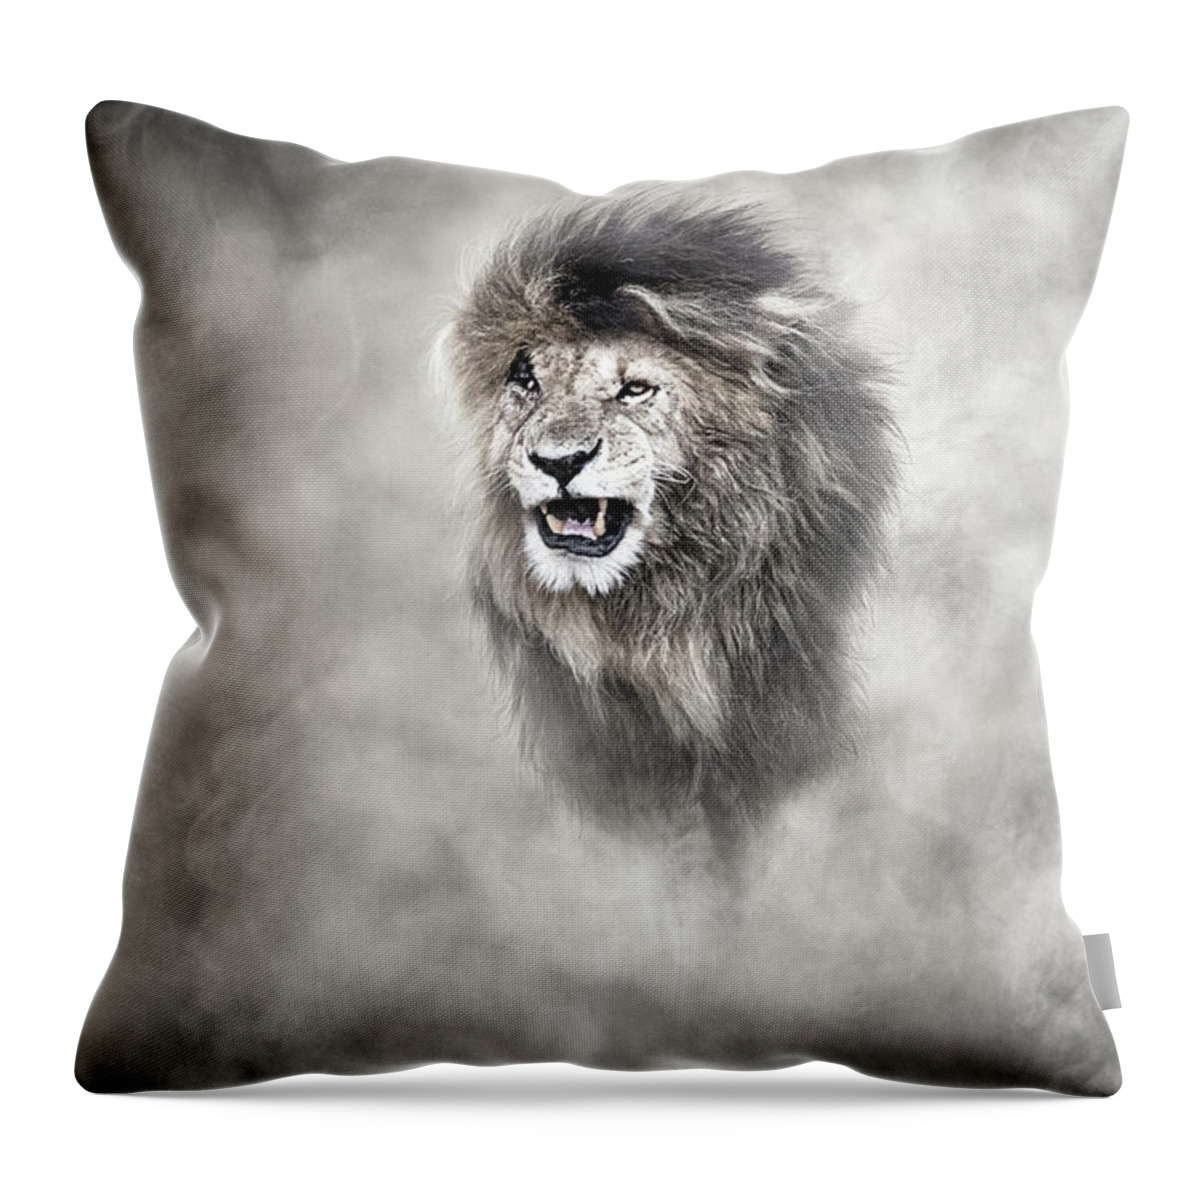 Lion Throw Pillow featuring the photograph Vulnerable African Lion In The Dust by Good Focused